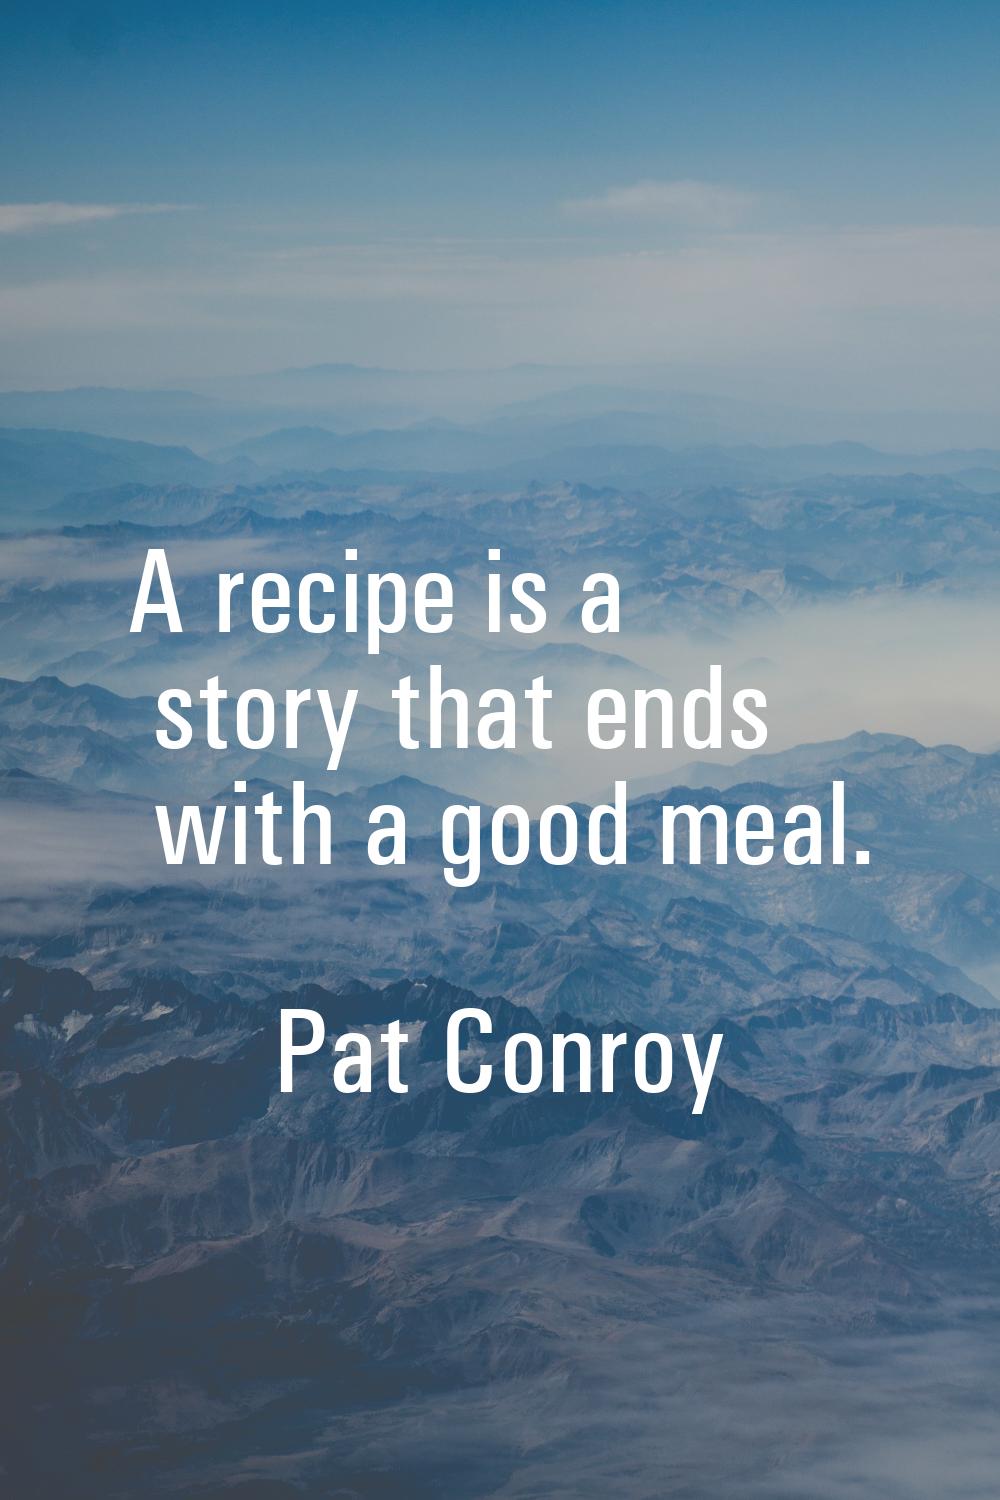 A recipe is a story that ends with a good meal.